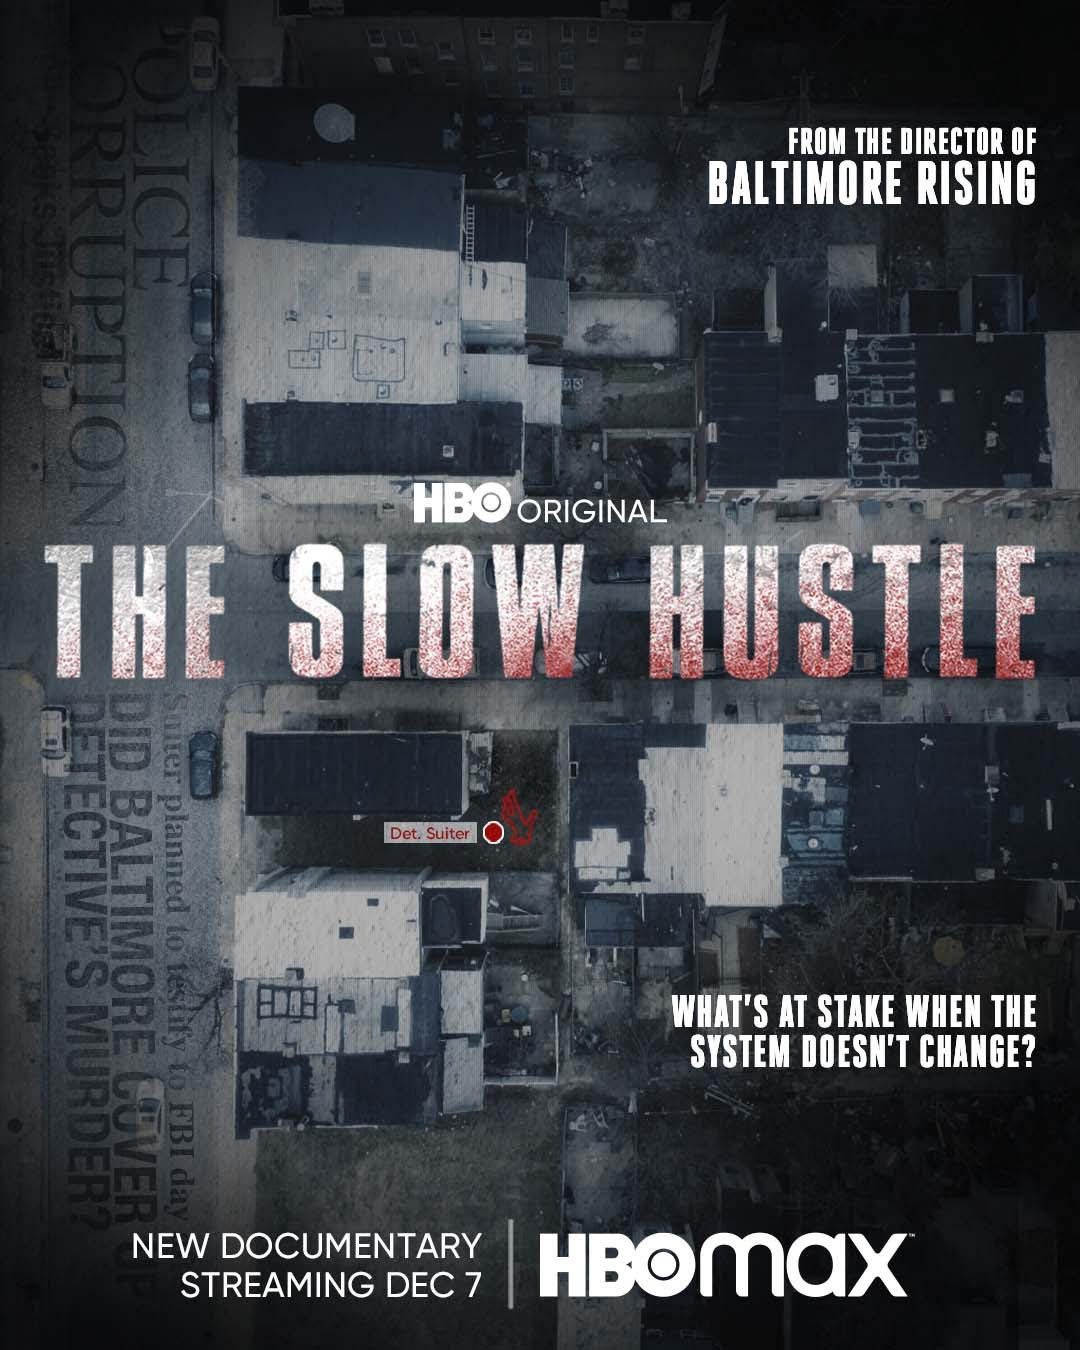 'THE SLOW HUSTLE Premieres on HBO' core news picture